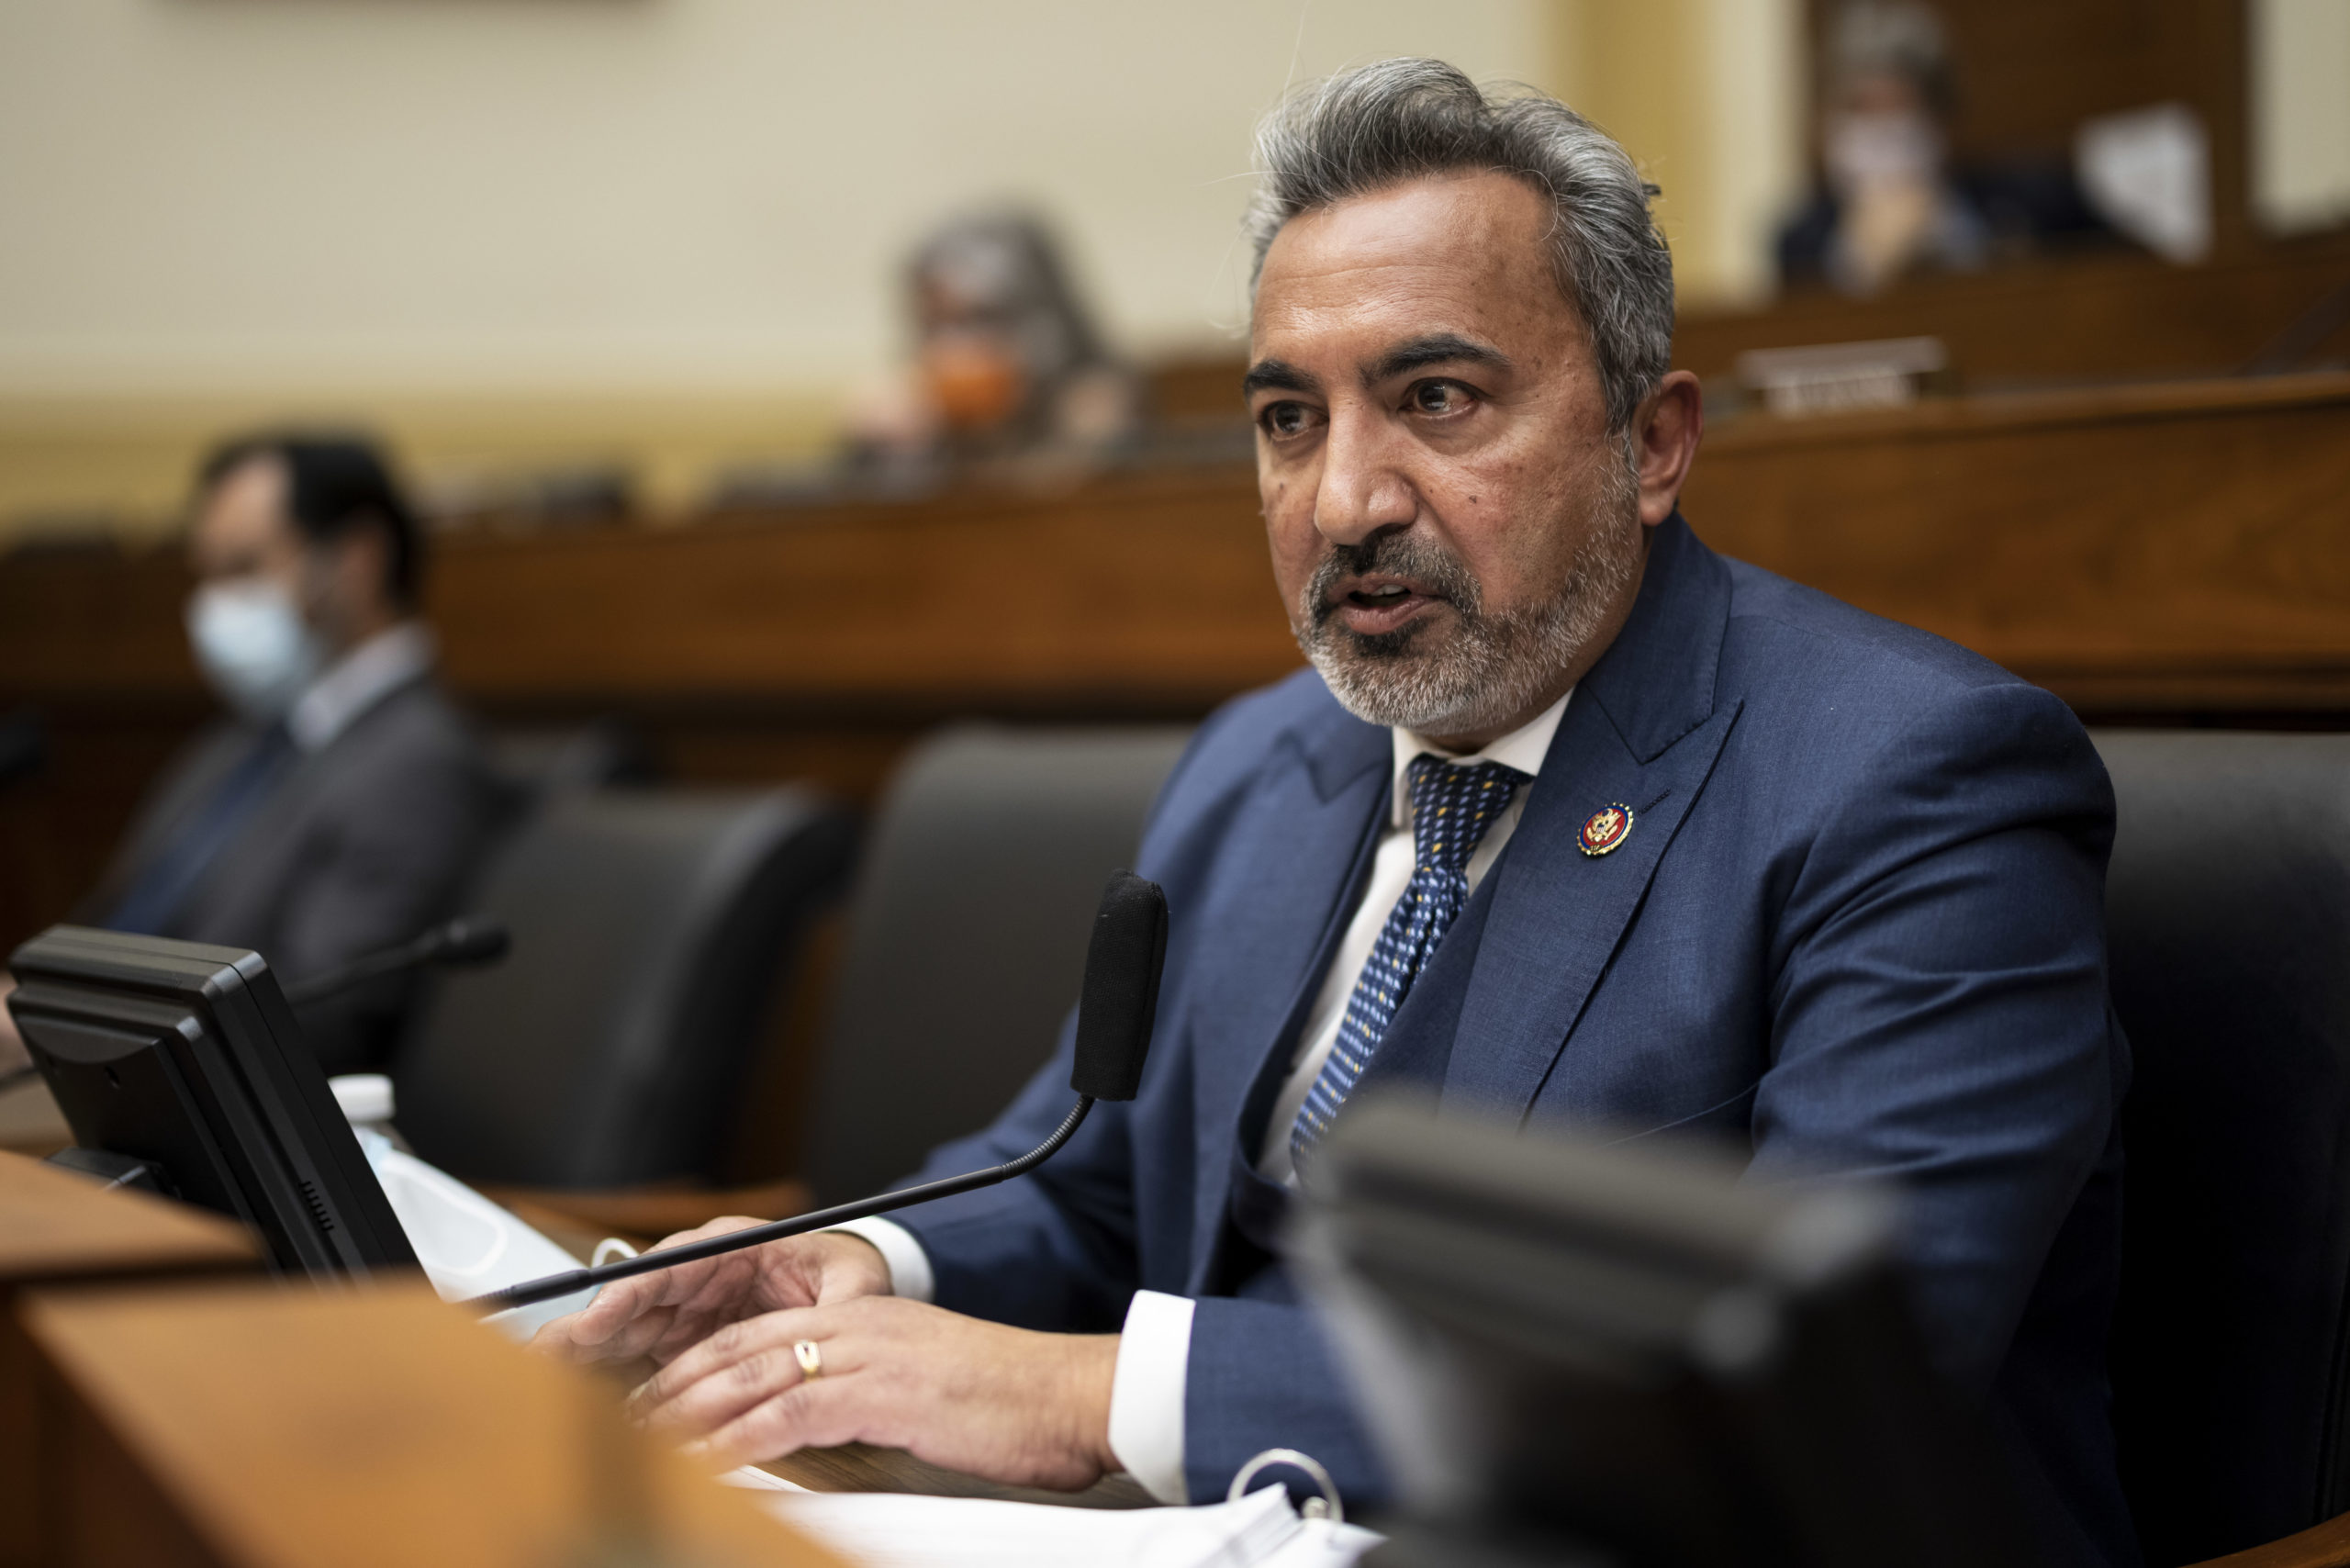 New Democrat Coalition Vice Chair for Outreach Rep. Ami Bera (D-Calif.)